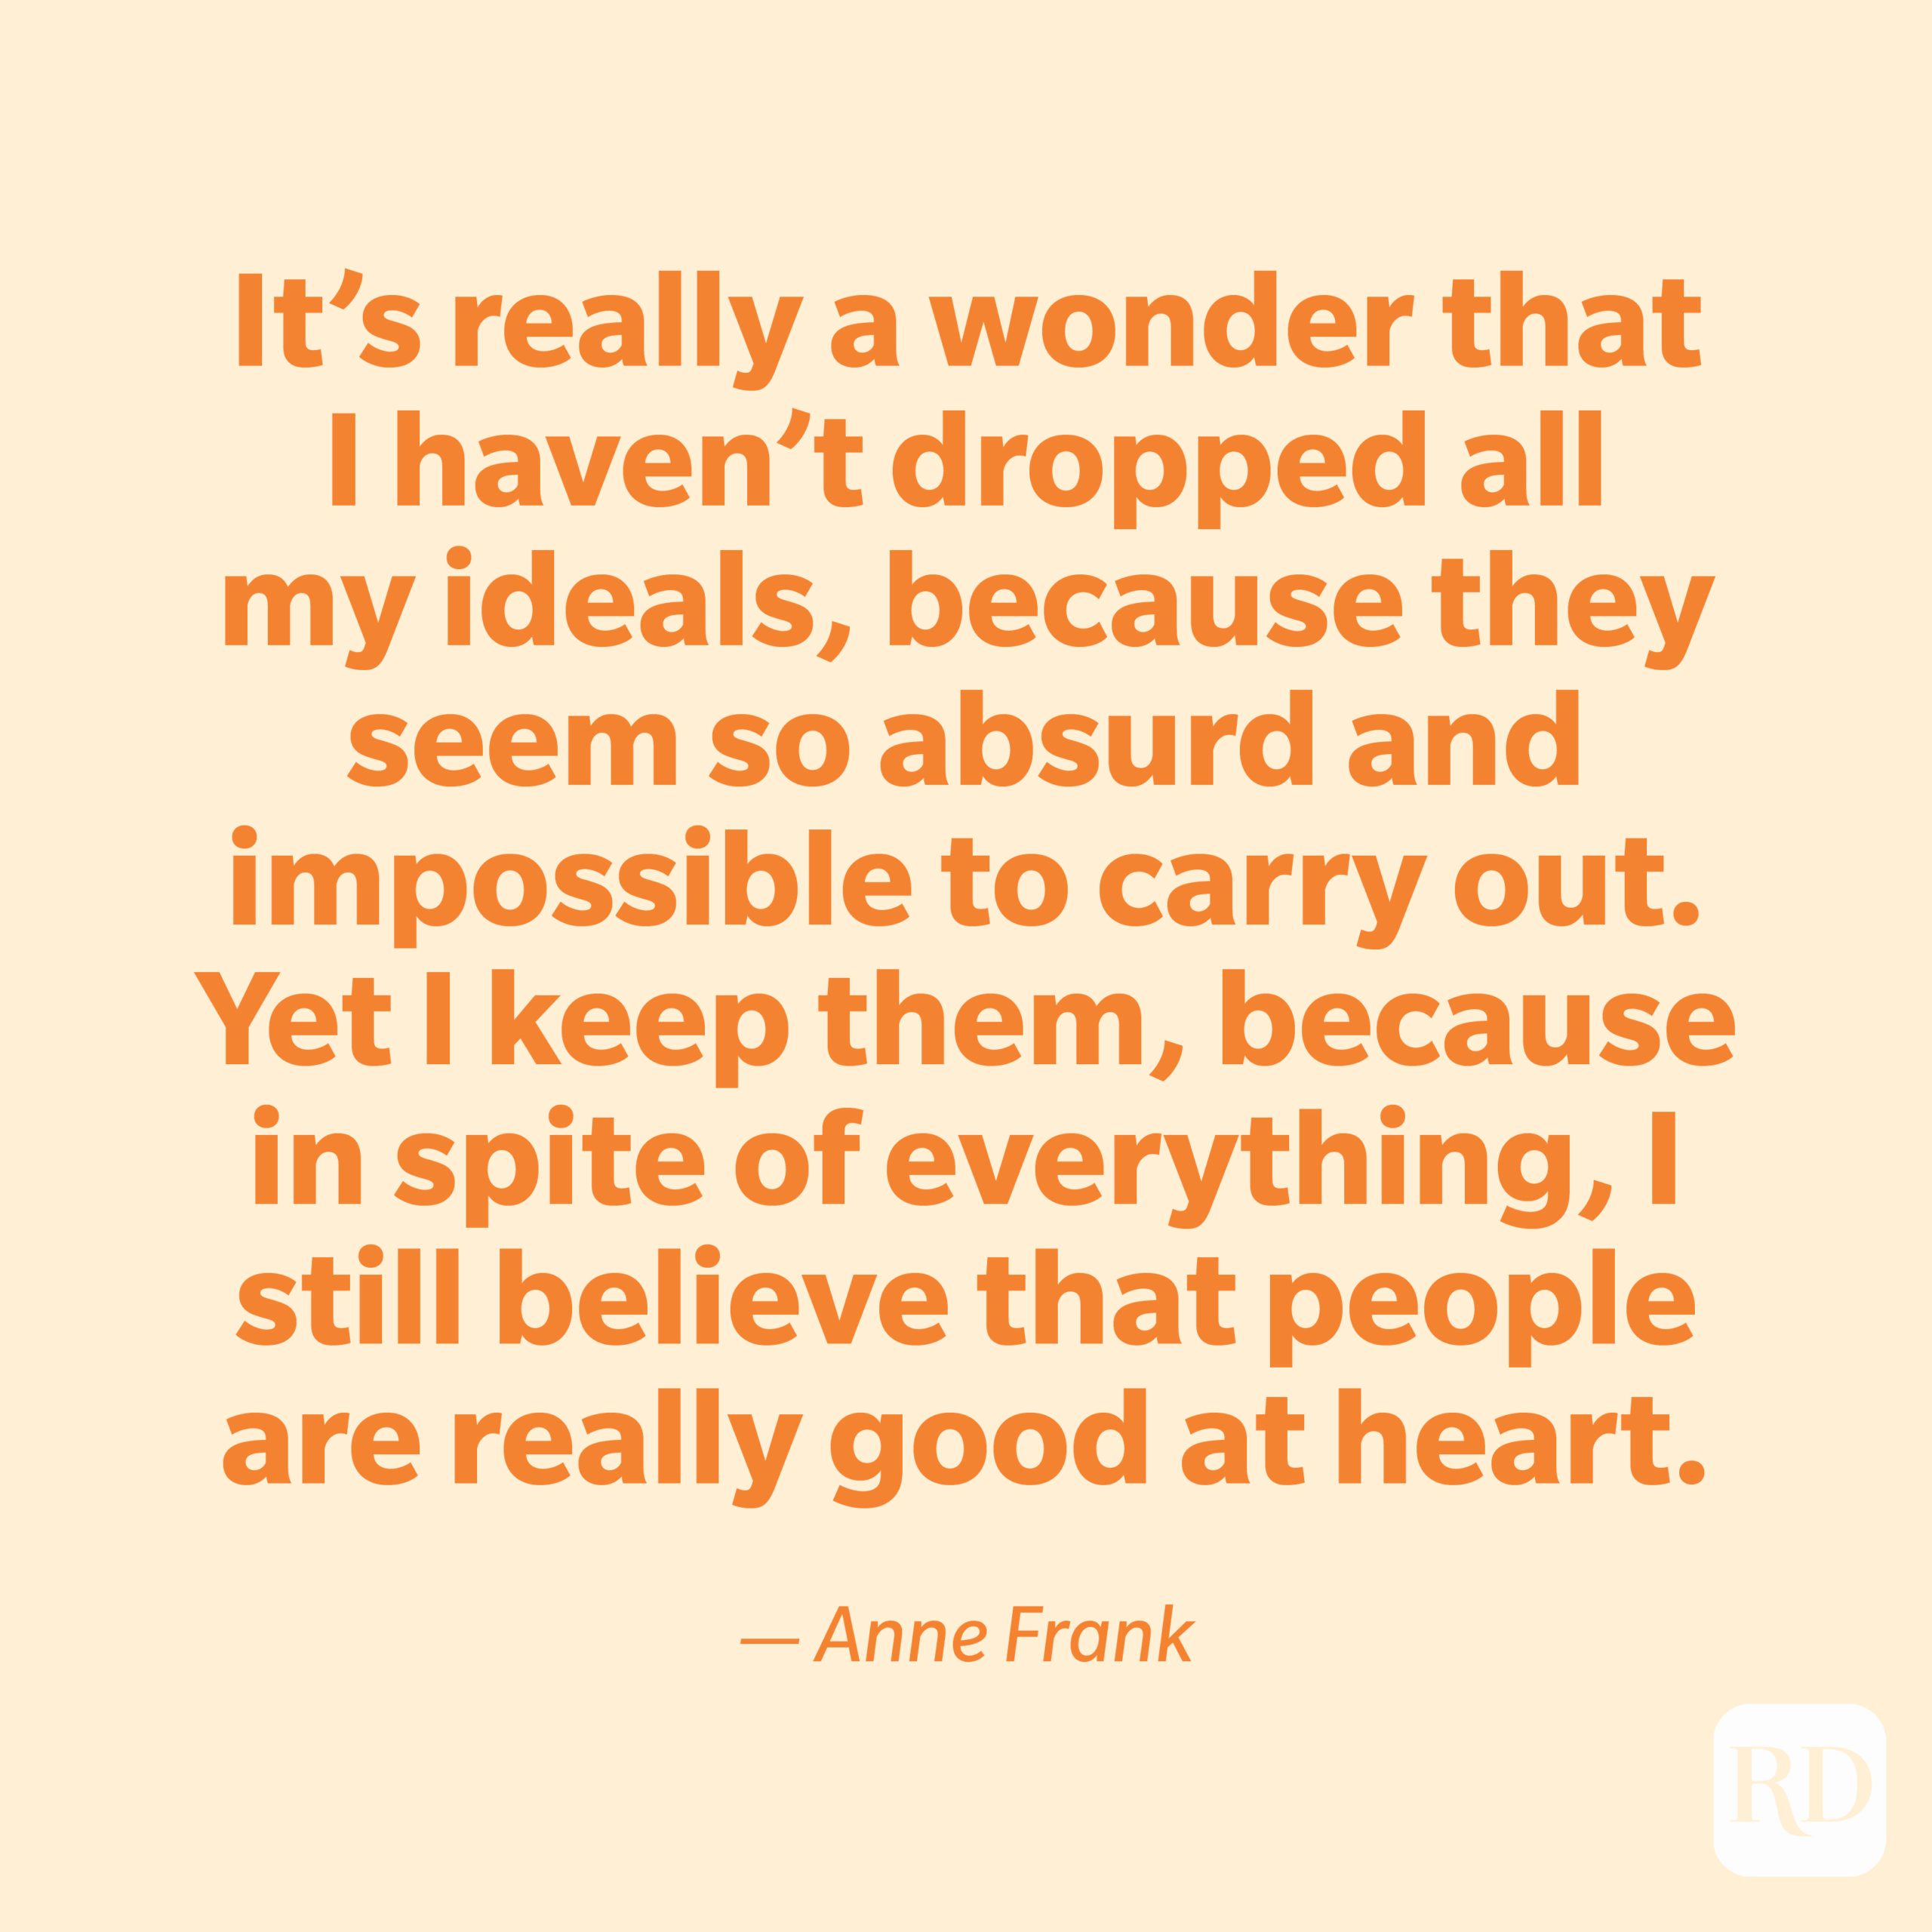 "It's really a wonder that I haven't dropped all my ideals, because they seem so absurd and impossible to carry out. Yet I keep them, because in spite of everything, I still believe that people are really good at heart." —Anne Frank